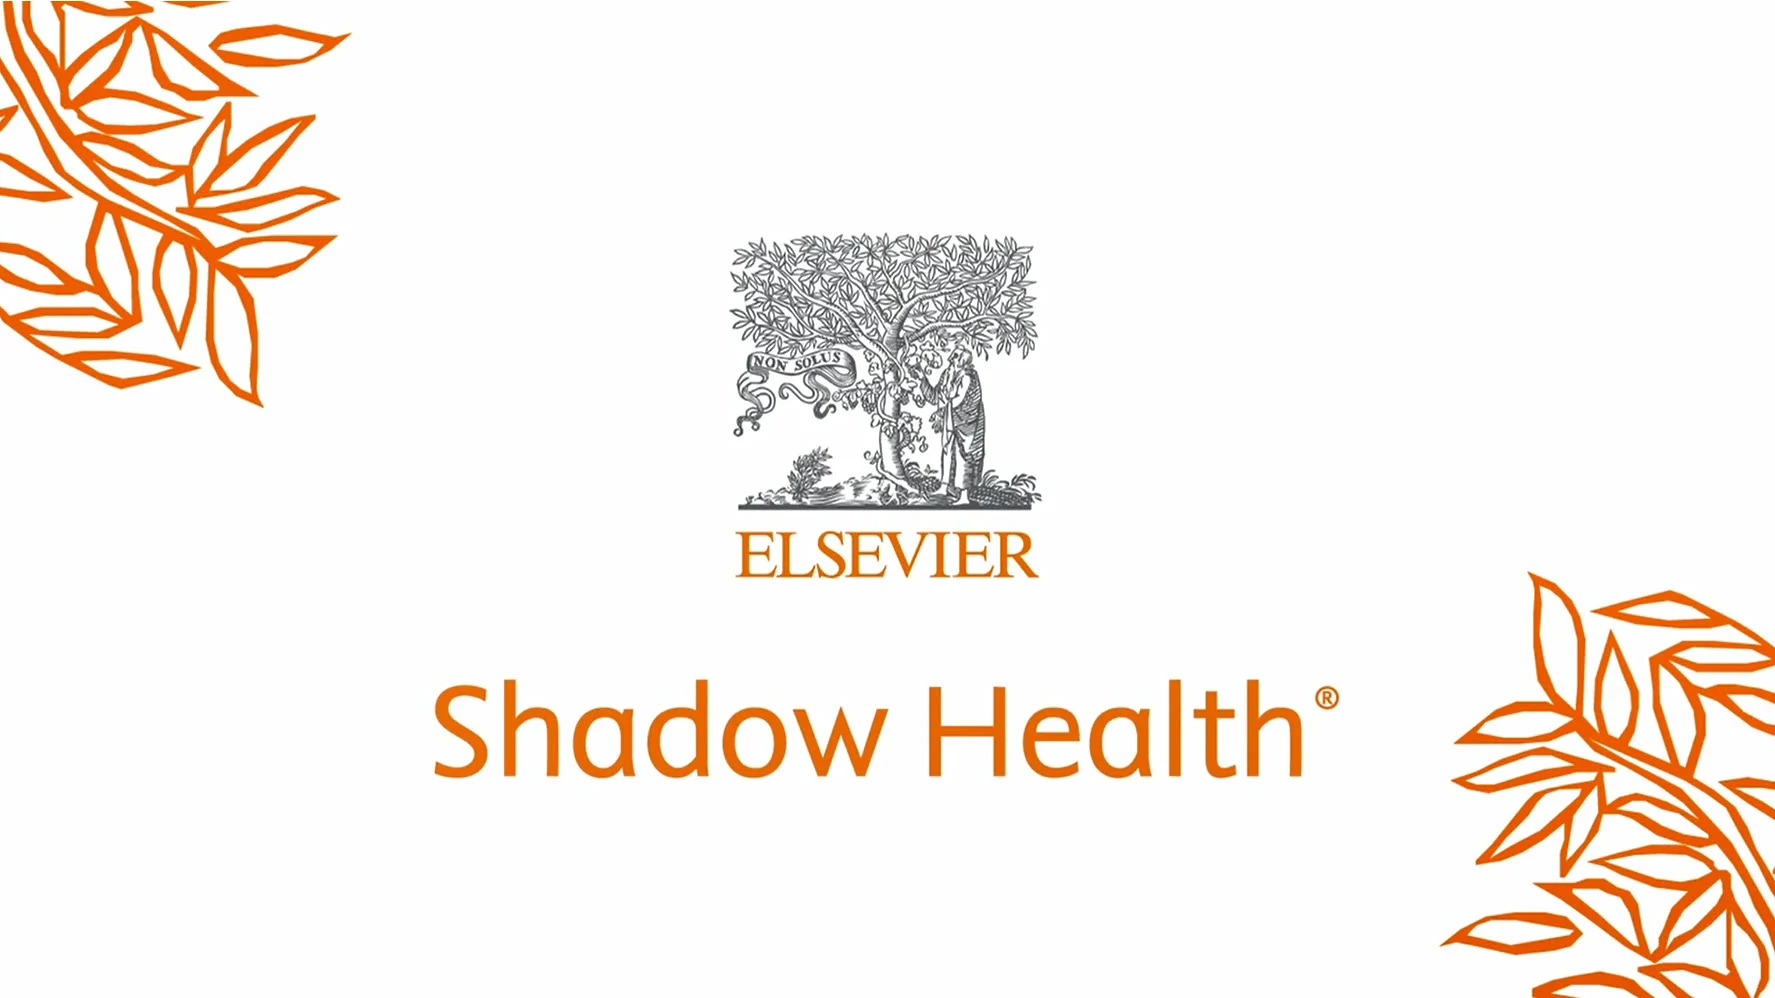 Shadow Health and Elsevier logos